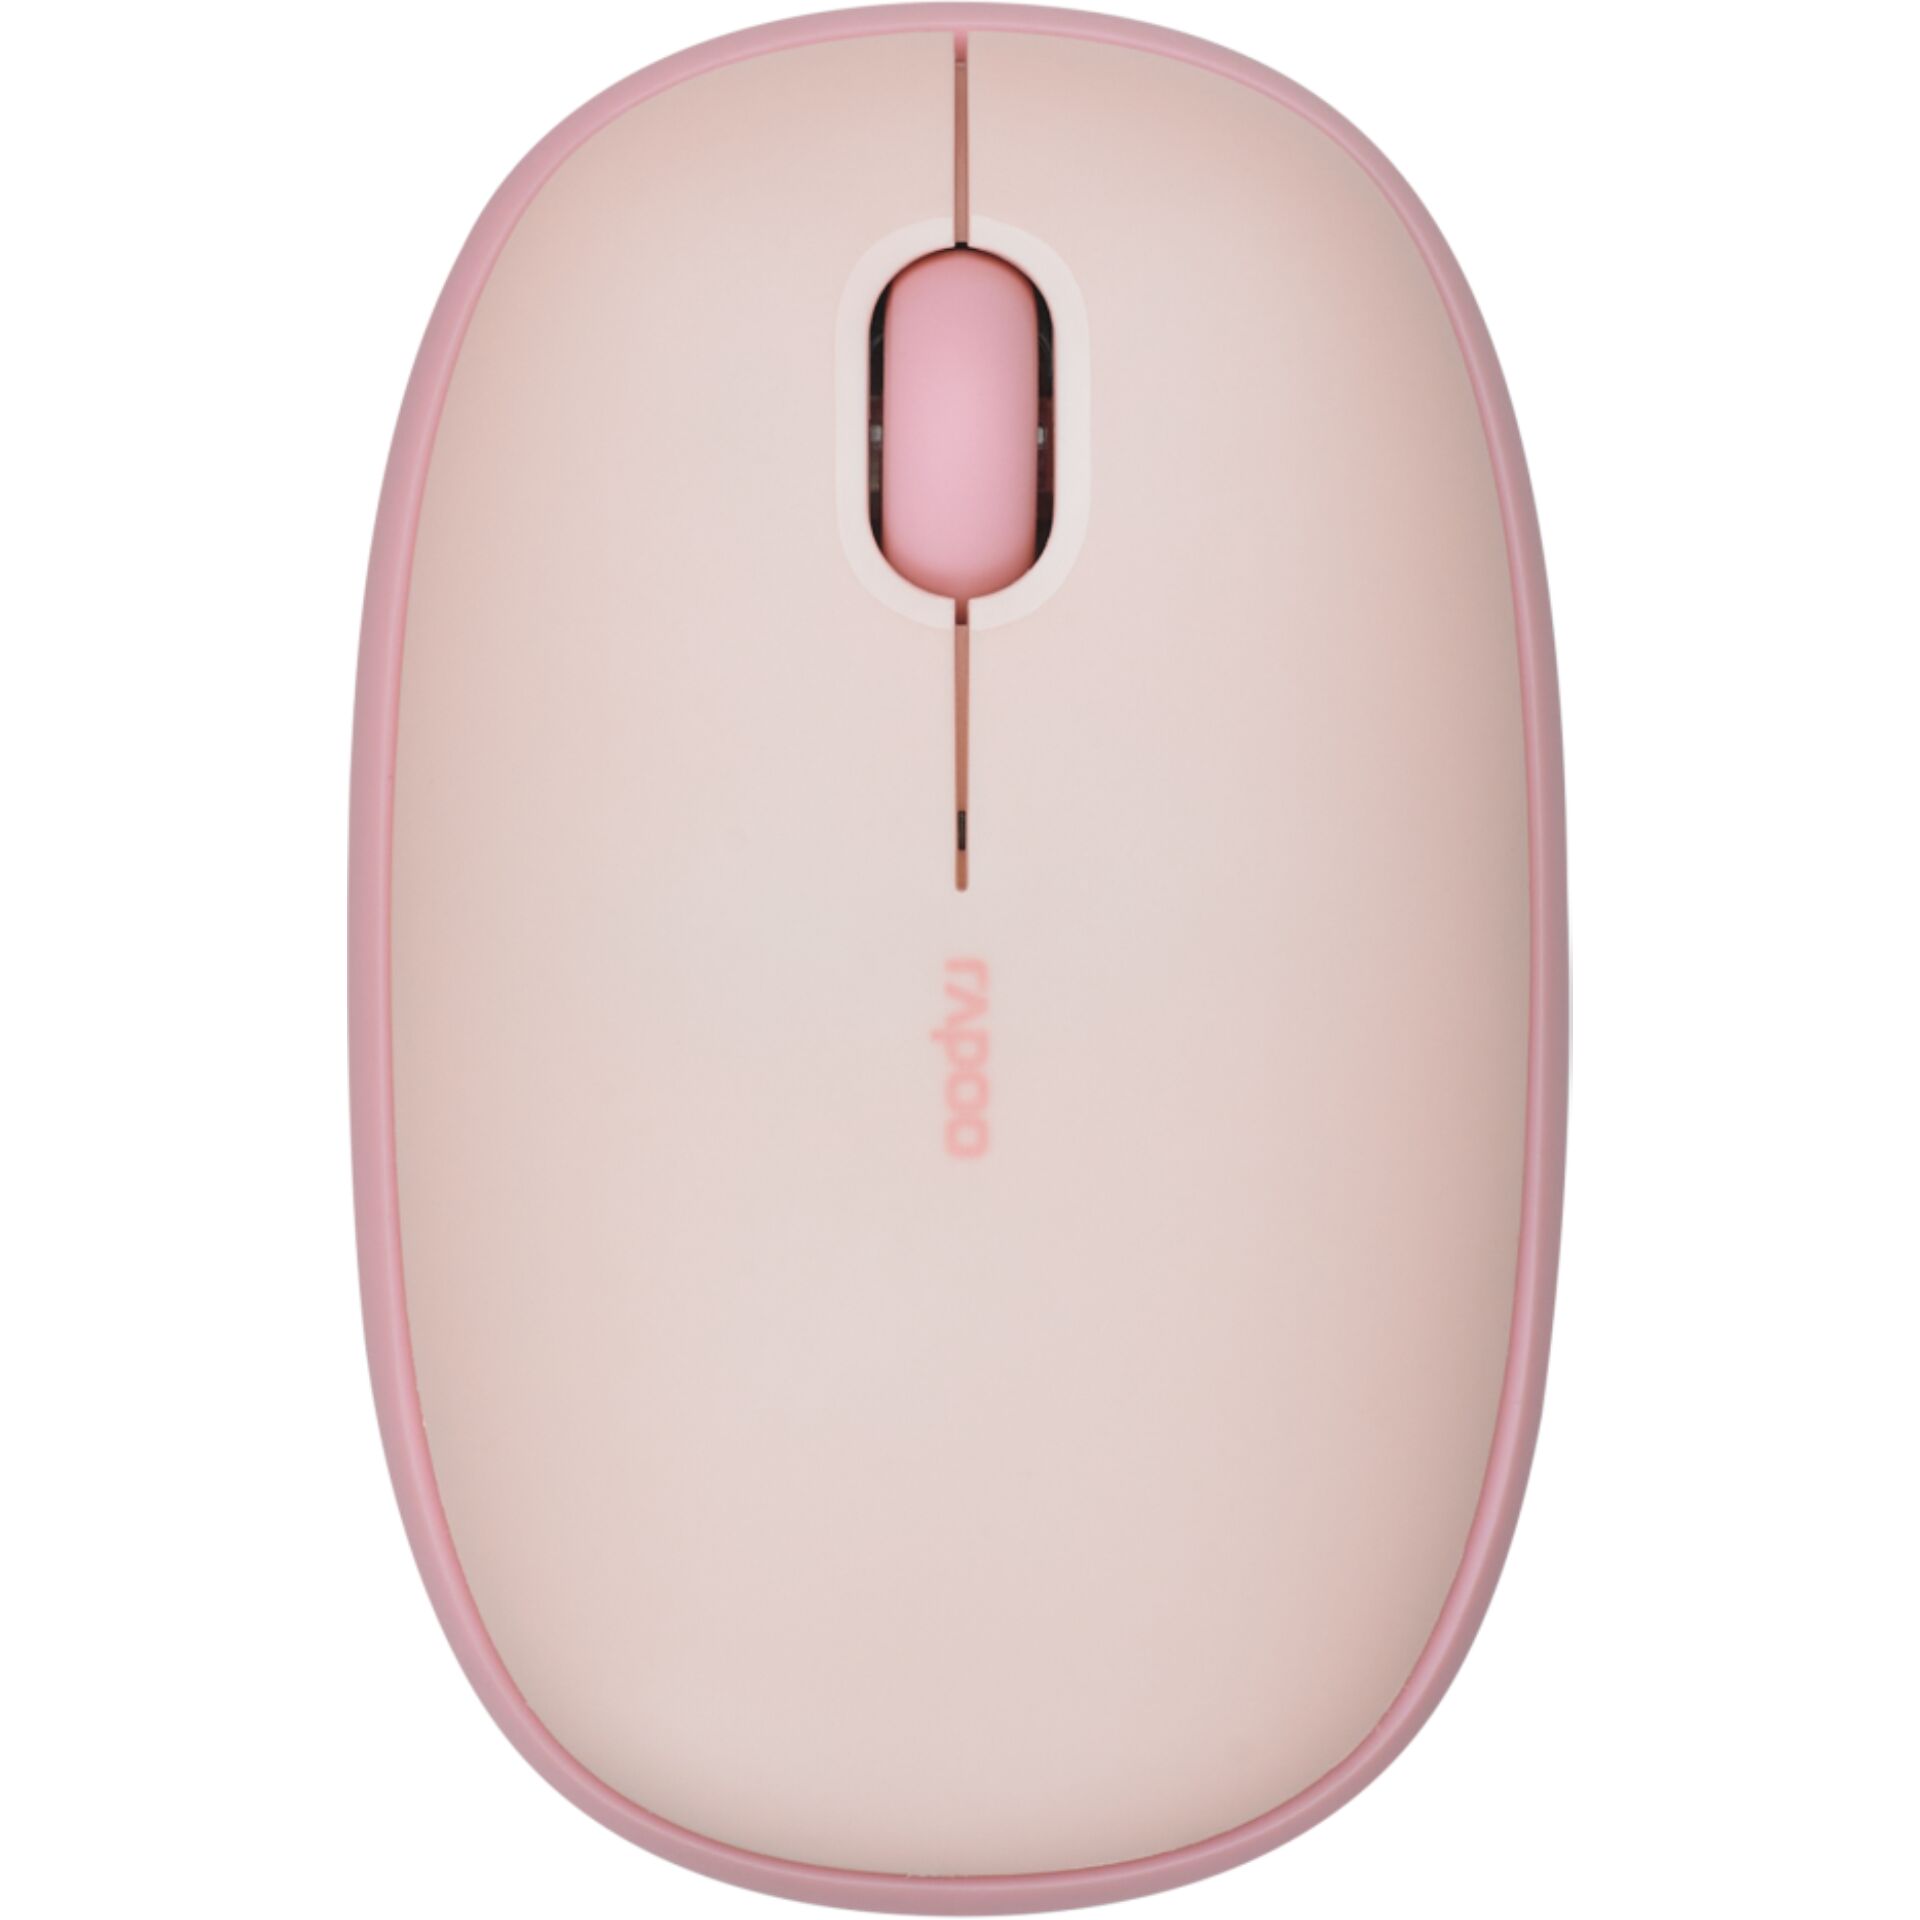 Rapoo M660 Silent Wireless Multi Mode Mouse Pink